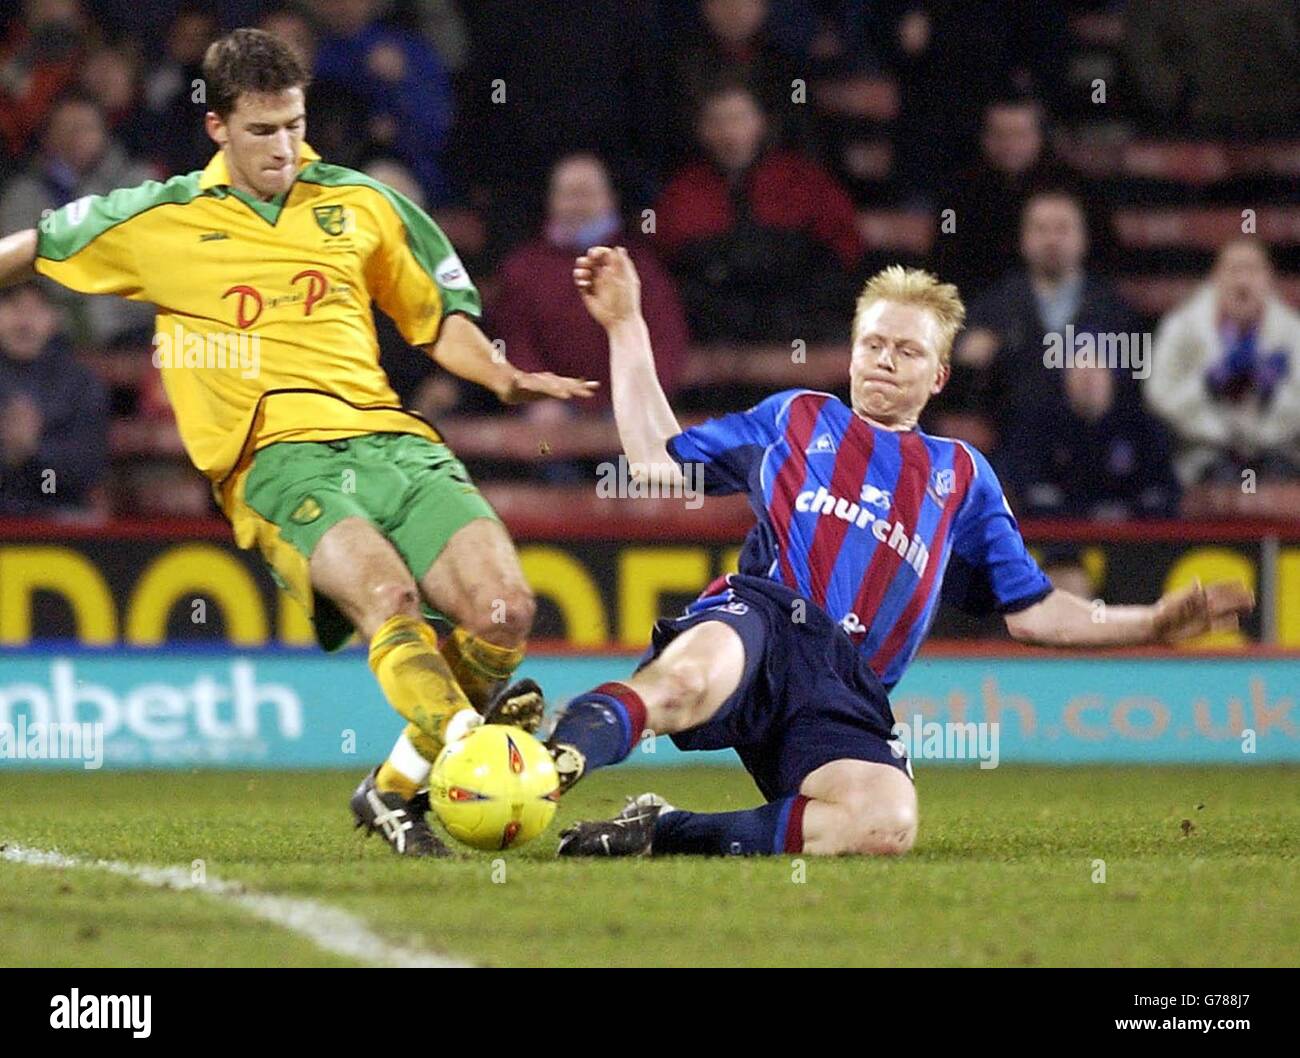 Norwich City's Adam Drury (L) challenges Crystal Palace's Aki Riihilahti during their Nationwide League Division One match at Crystal Palace's Selhurst Park ground in London. NO UNOFFICIAL CLUB WEBSITE USE. Stock Photo